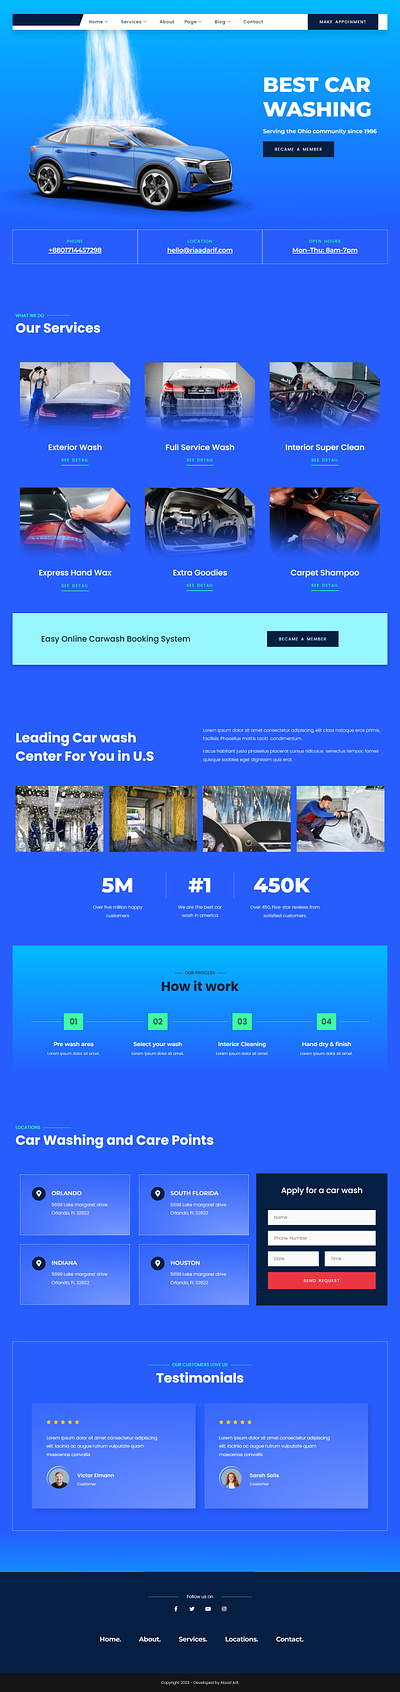 Car Washing & Cleaning Services Website auto car website auto mechanic website auto wash website booking booking website car cleaning website car repair website car service car services car wash website carwash serivice landing page professional website responsive website vehicle cleaning web web design website design wordpress wordpress website